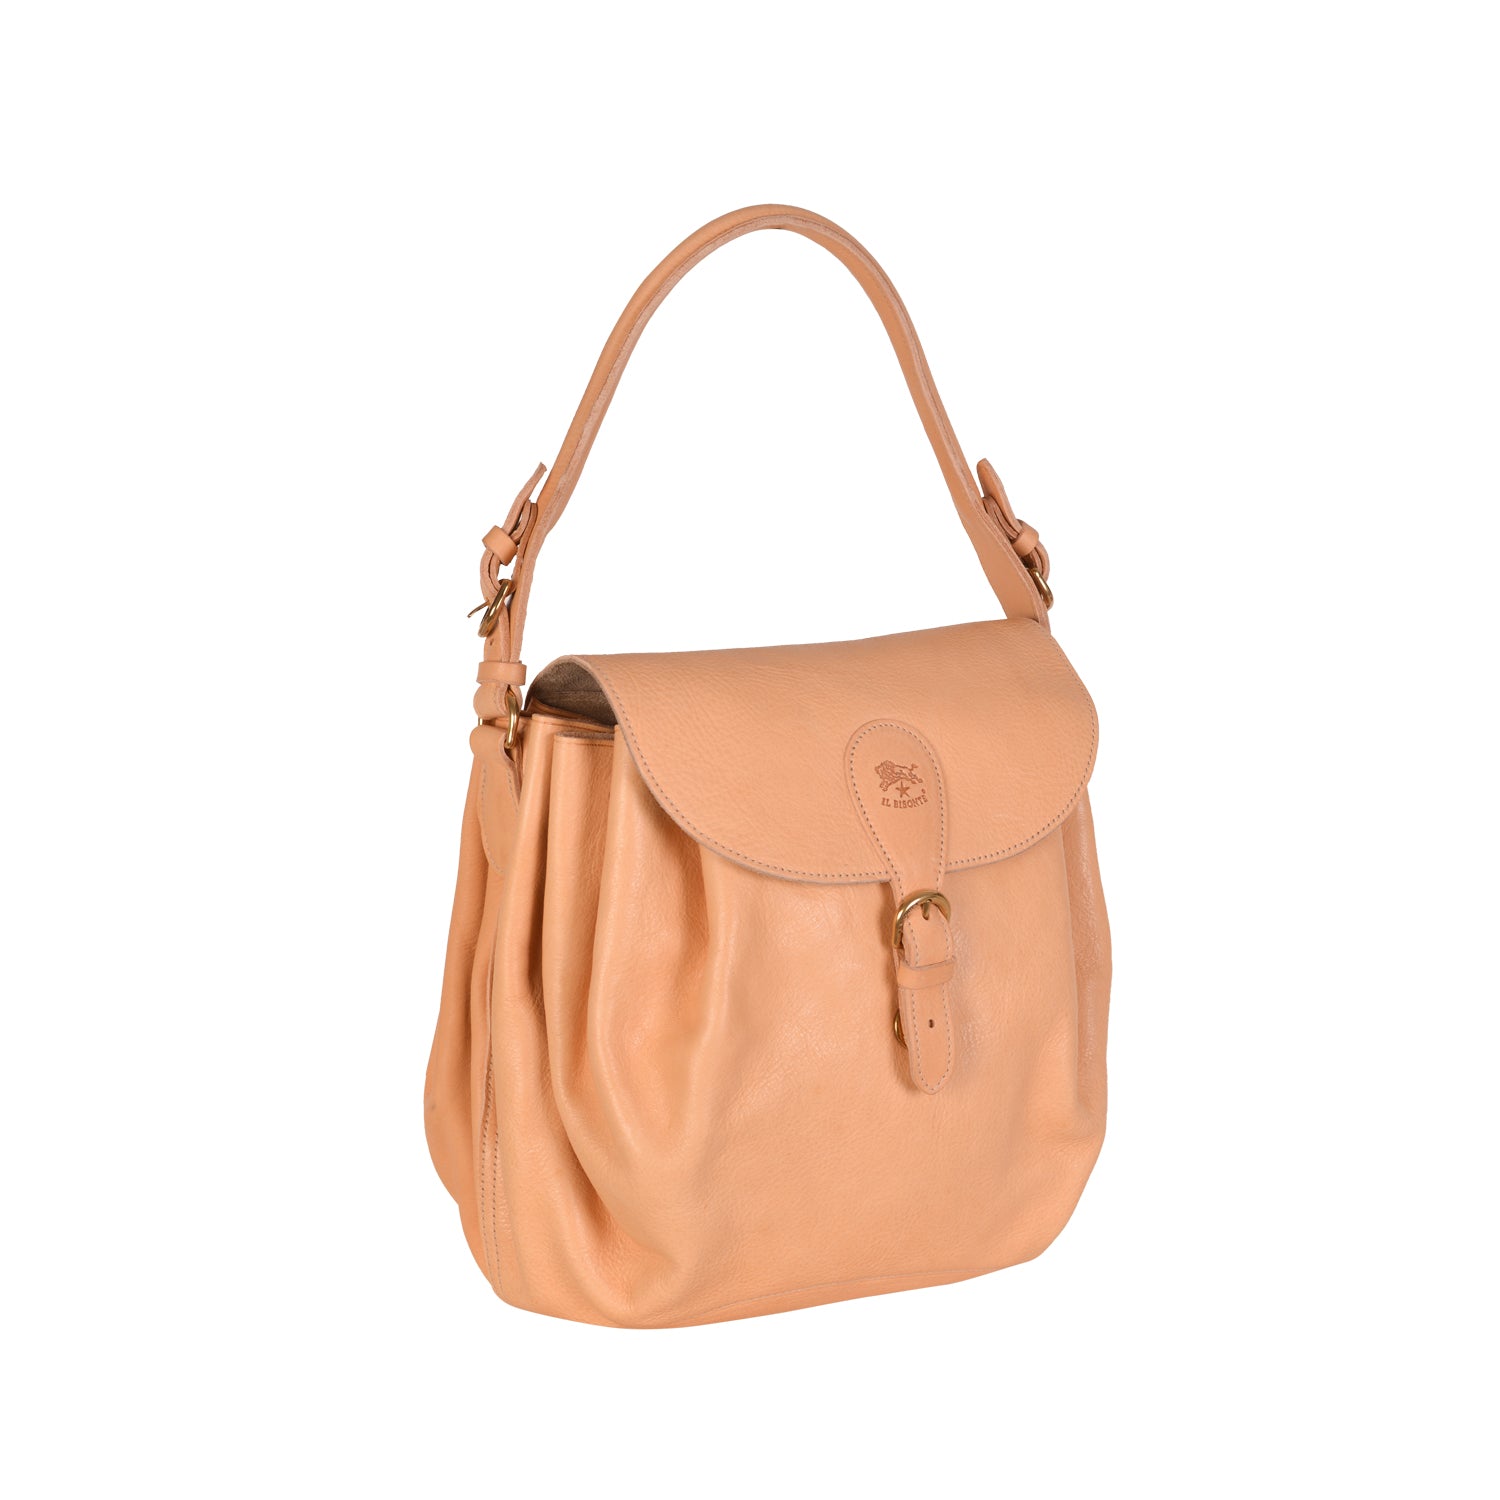 NEW IL BISONTE WOMEN'S CURLY COLLECTION SHOULDER BAG IN BEIGE LEATHER